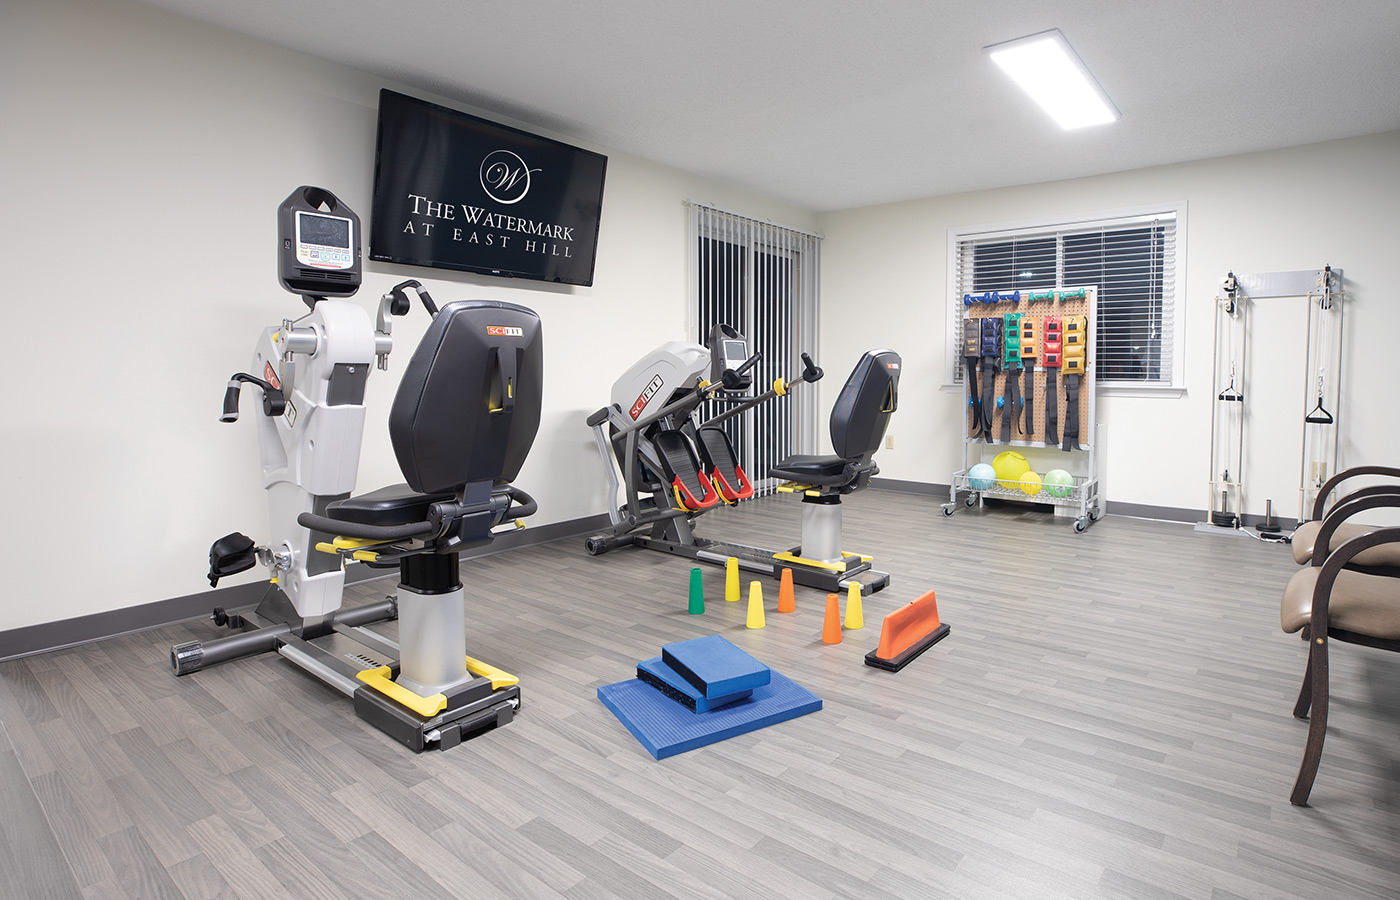 A fitness area at The Watermark at East Hill.